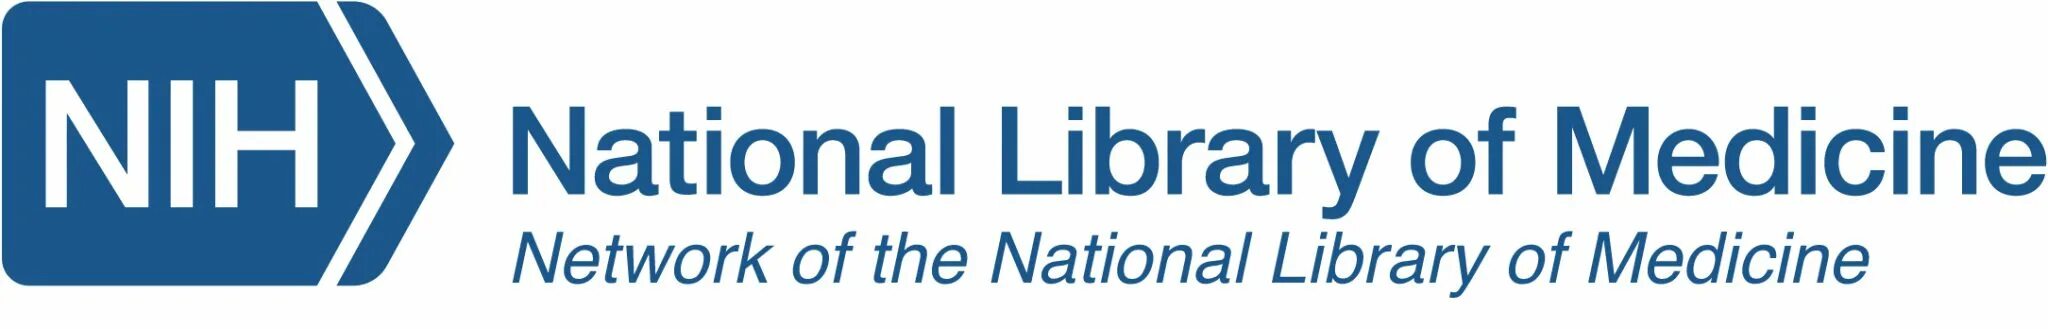 Library of medicine. National Library of Medicine. New England Journal of Medicine. National Library of Medicine нейросеть. National Library of Medicine in Bethesda.